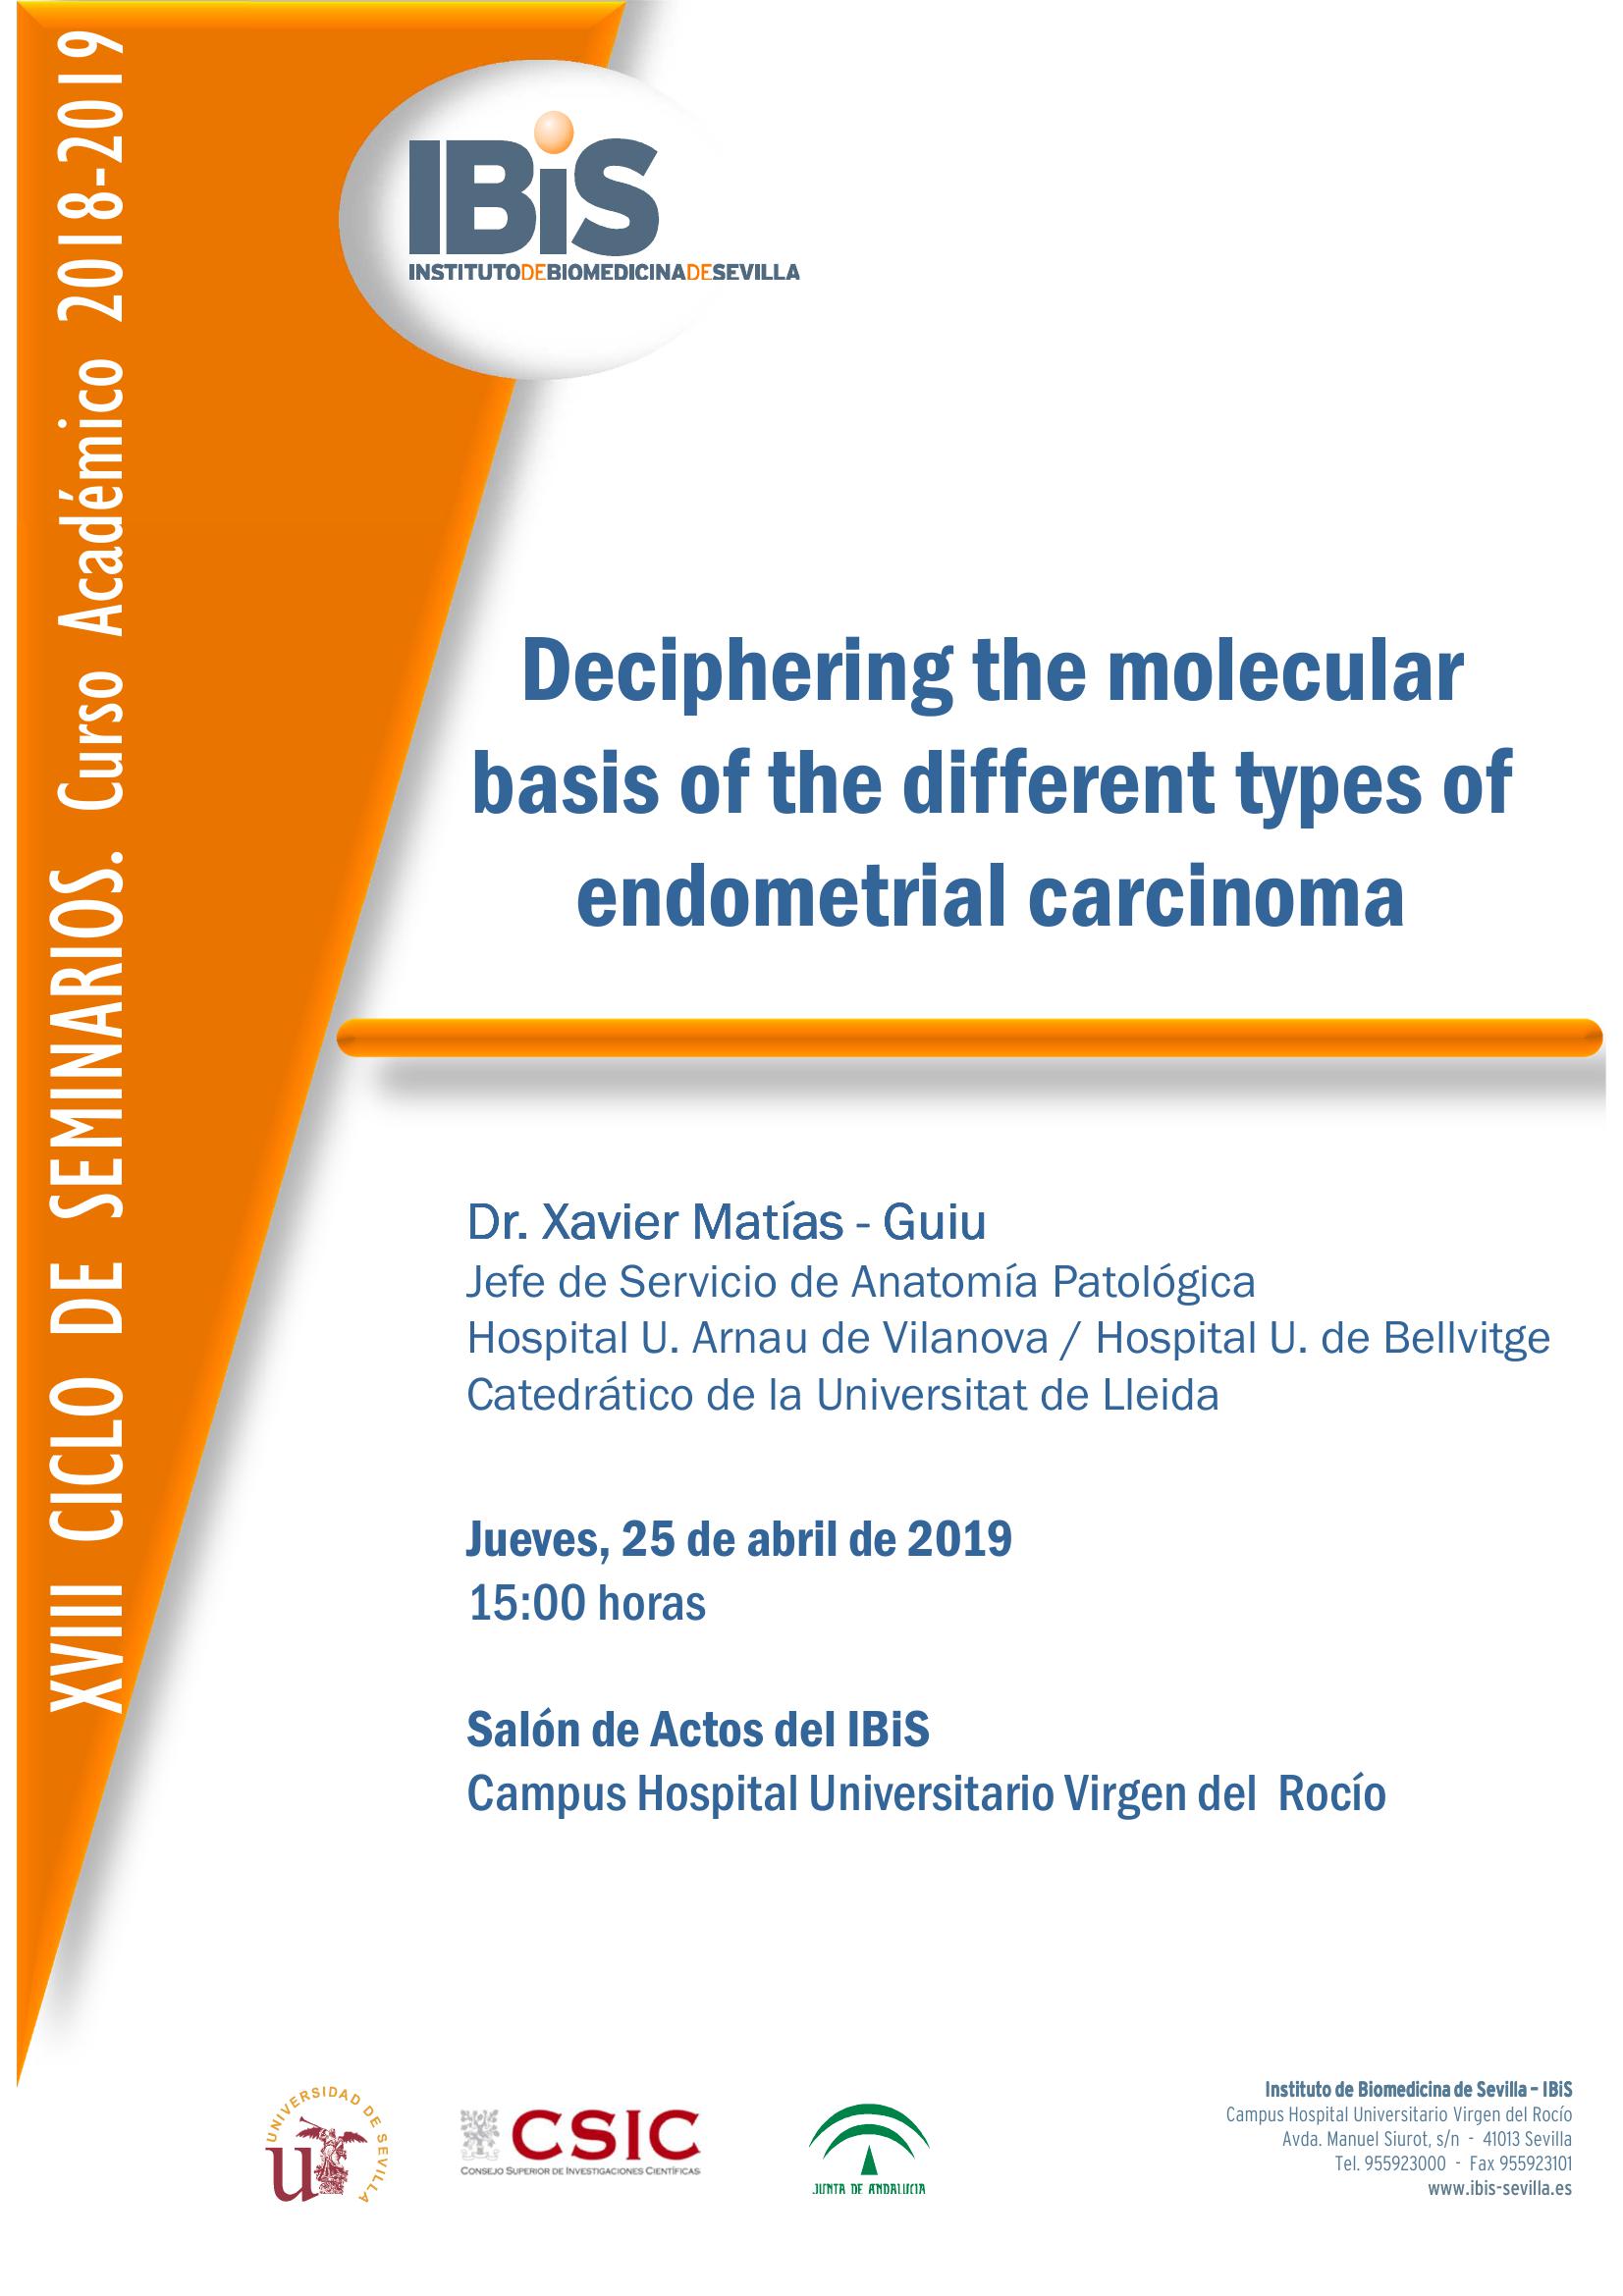 Poster: Deciphering the molecular basis of the different types of endometrial carcinoma